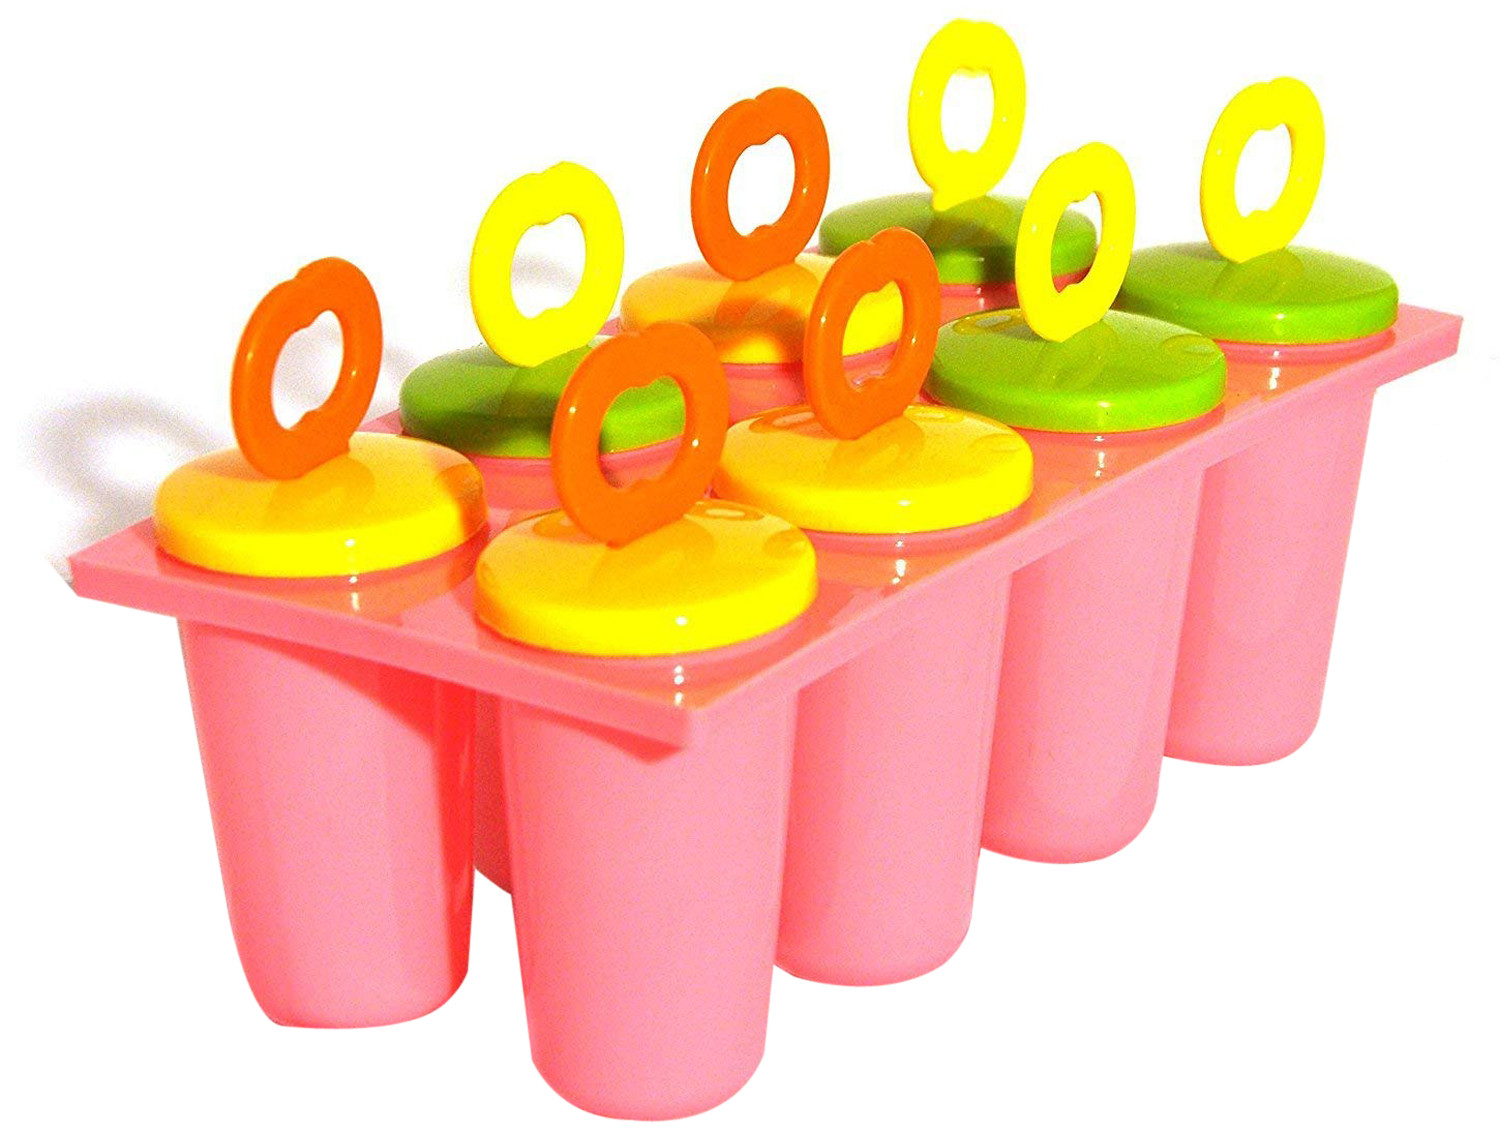 Kuber Industries Plastic Ice Candy Maker Kulfi Maker Moulds Set With 8 Cups (Multi) -CTKTC38127